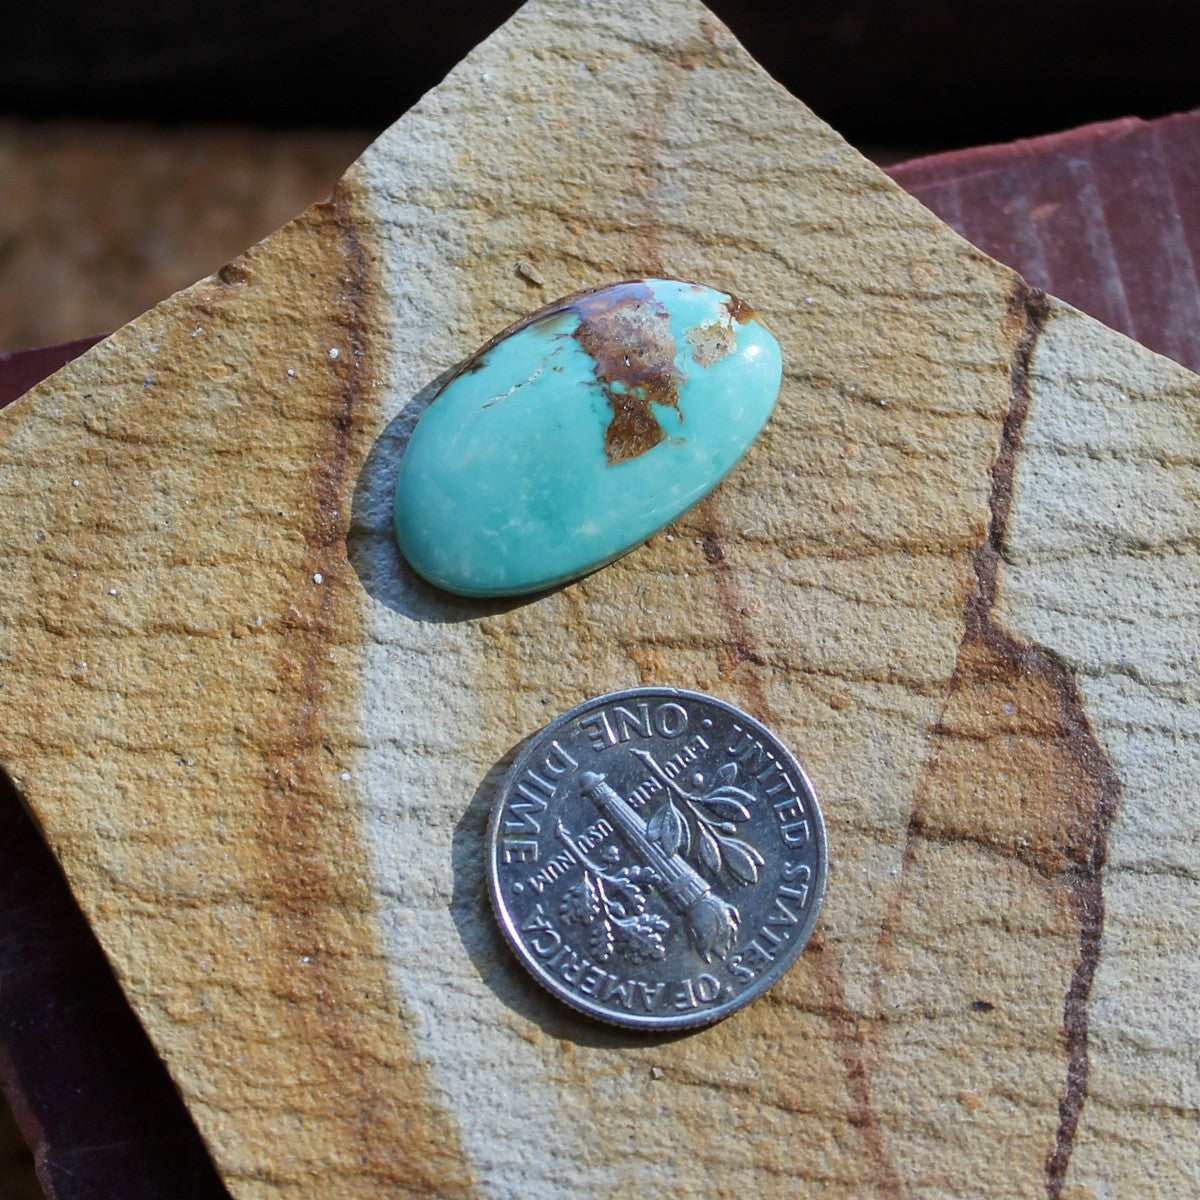 9.7 carat blue Stone Mountain Turquoise cabochon with red matrix